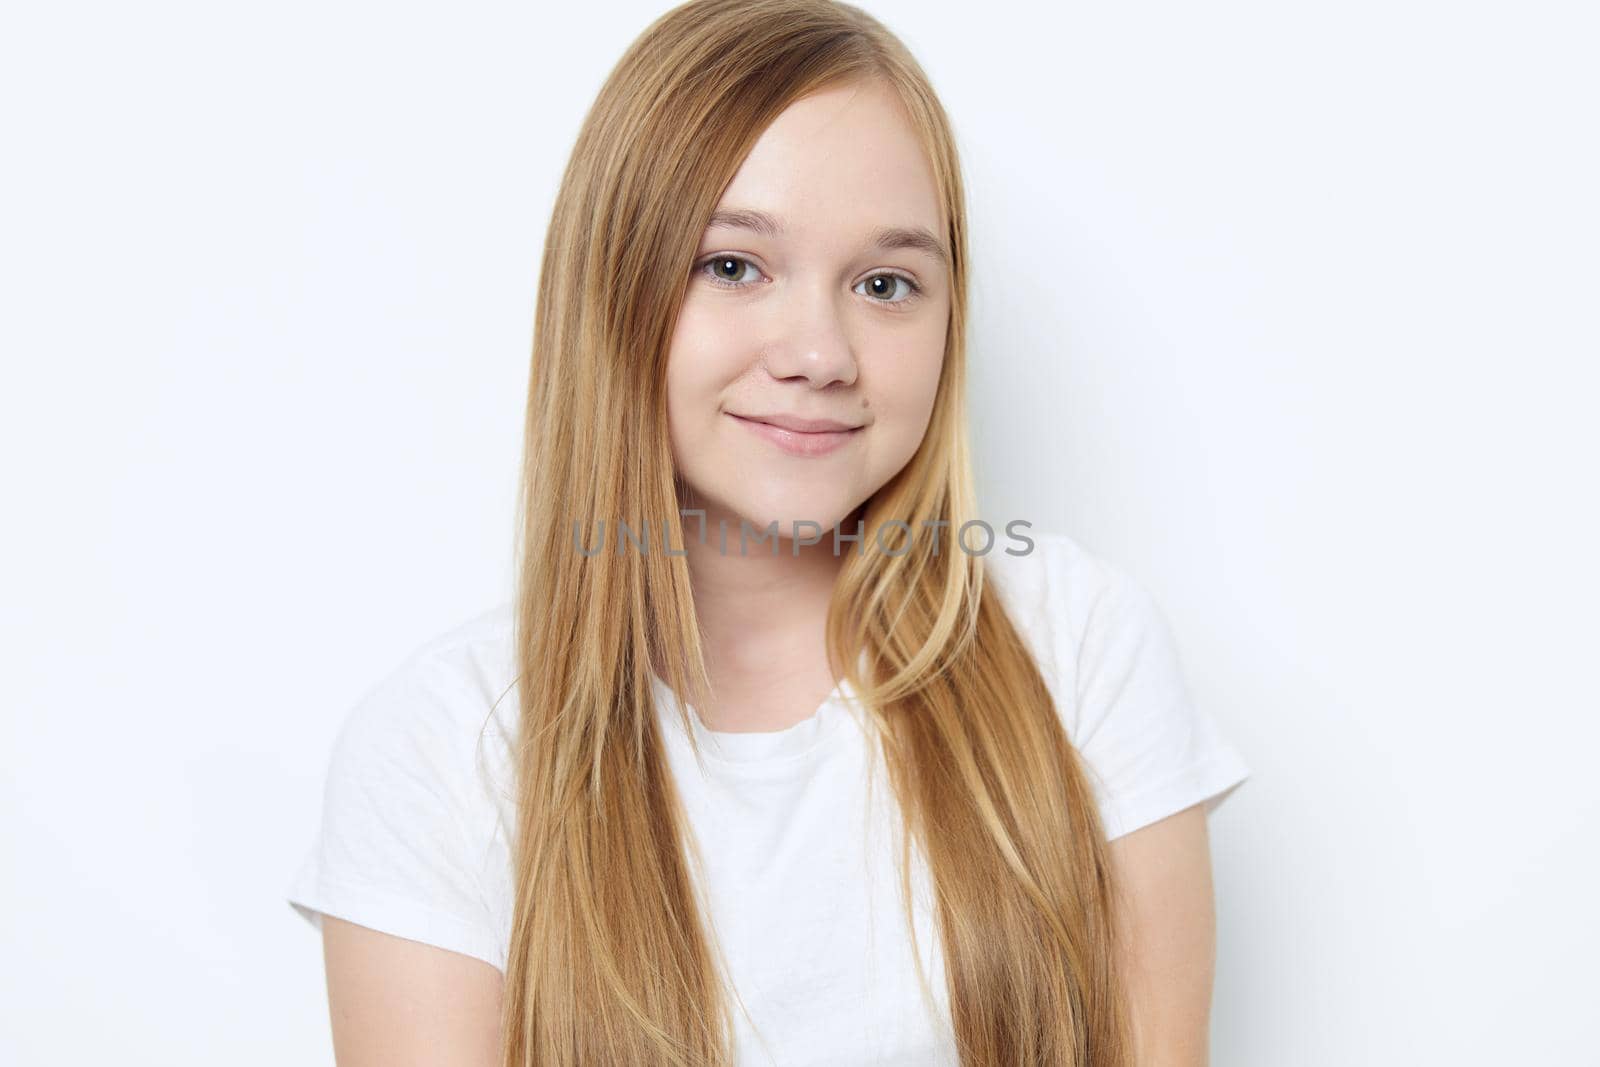 smiling girl blonde hair cropped view Studio isolated background by SHOTPRIME